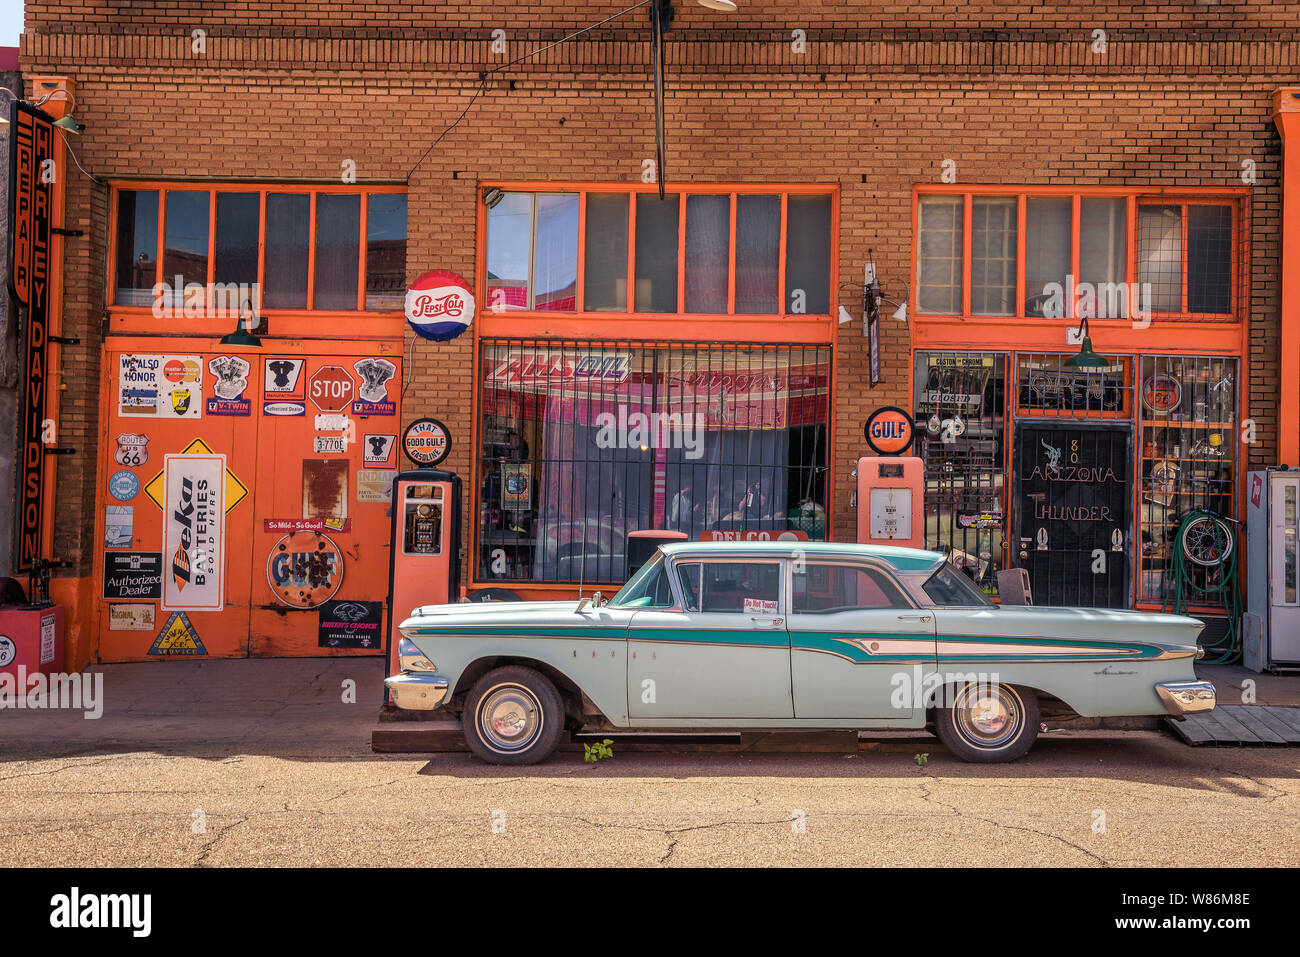 Vintage Edsel car at the Erie street in Lowell, now part of Bisbee, Arizona Stock Photo